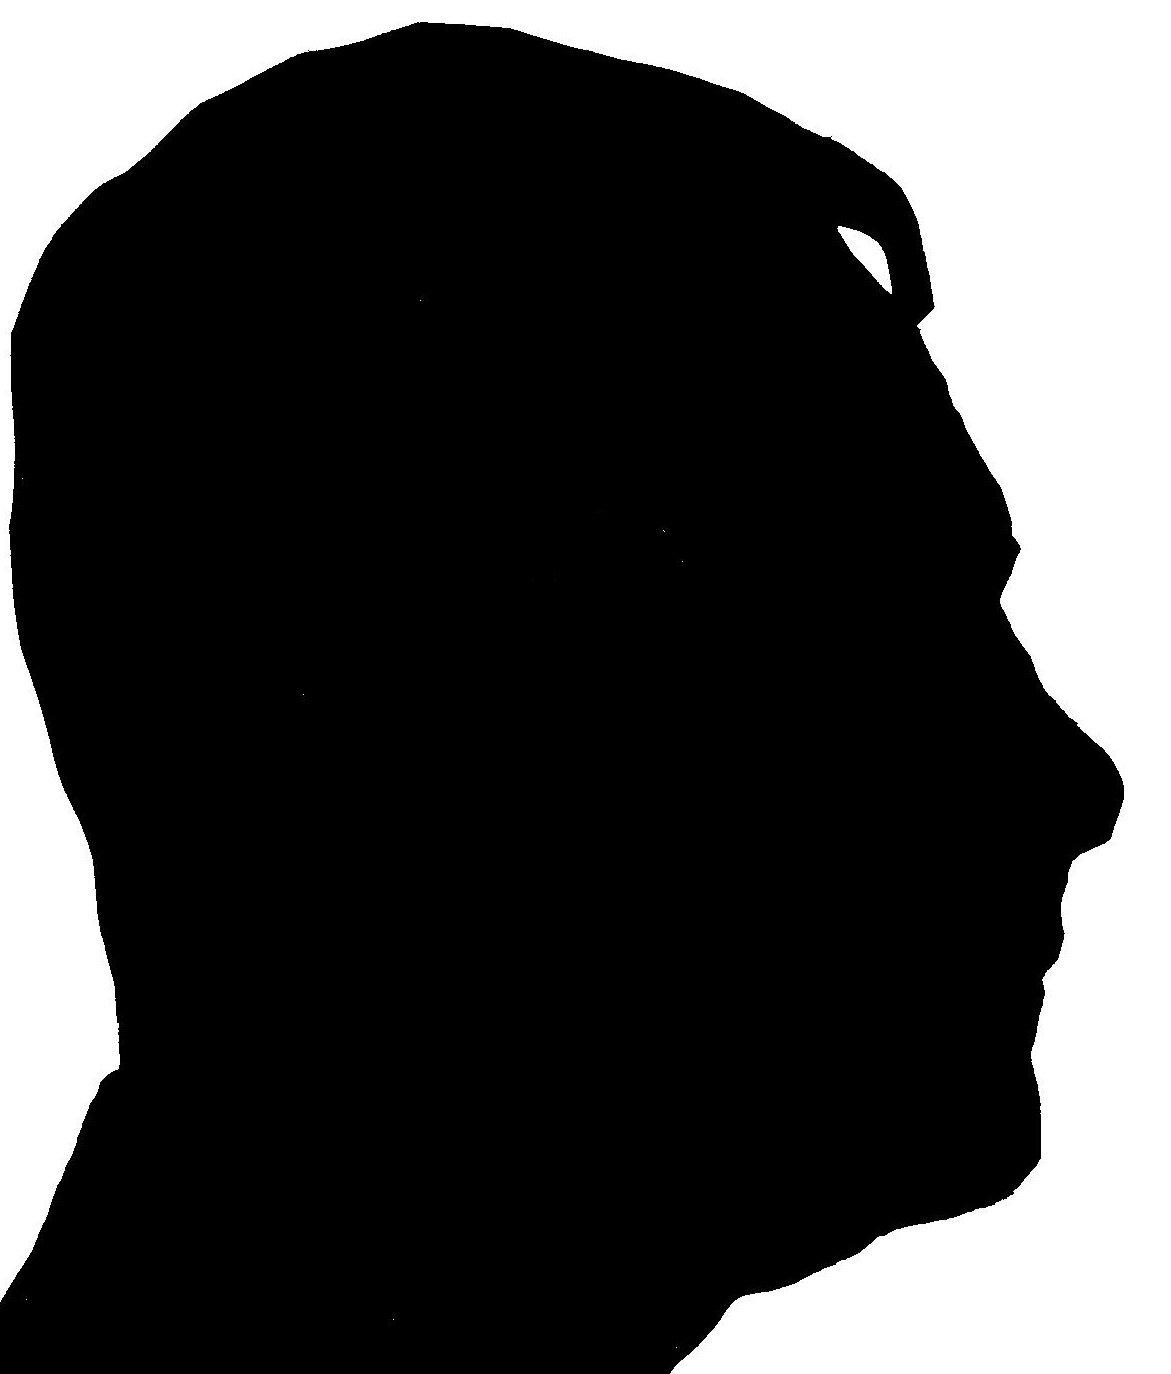 Playing with shadows: silhouette portraits and how to make them ...